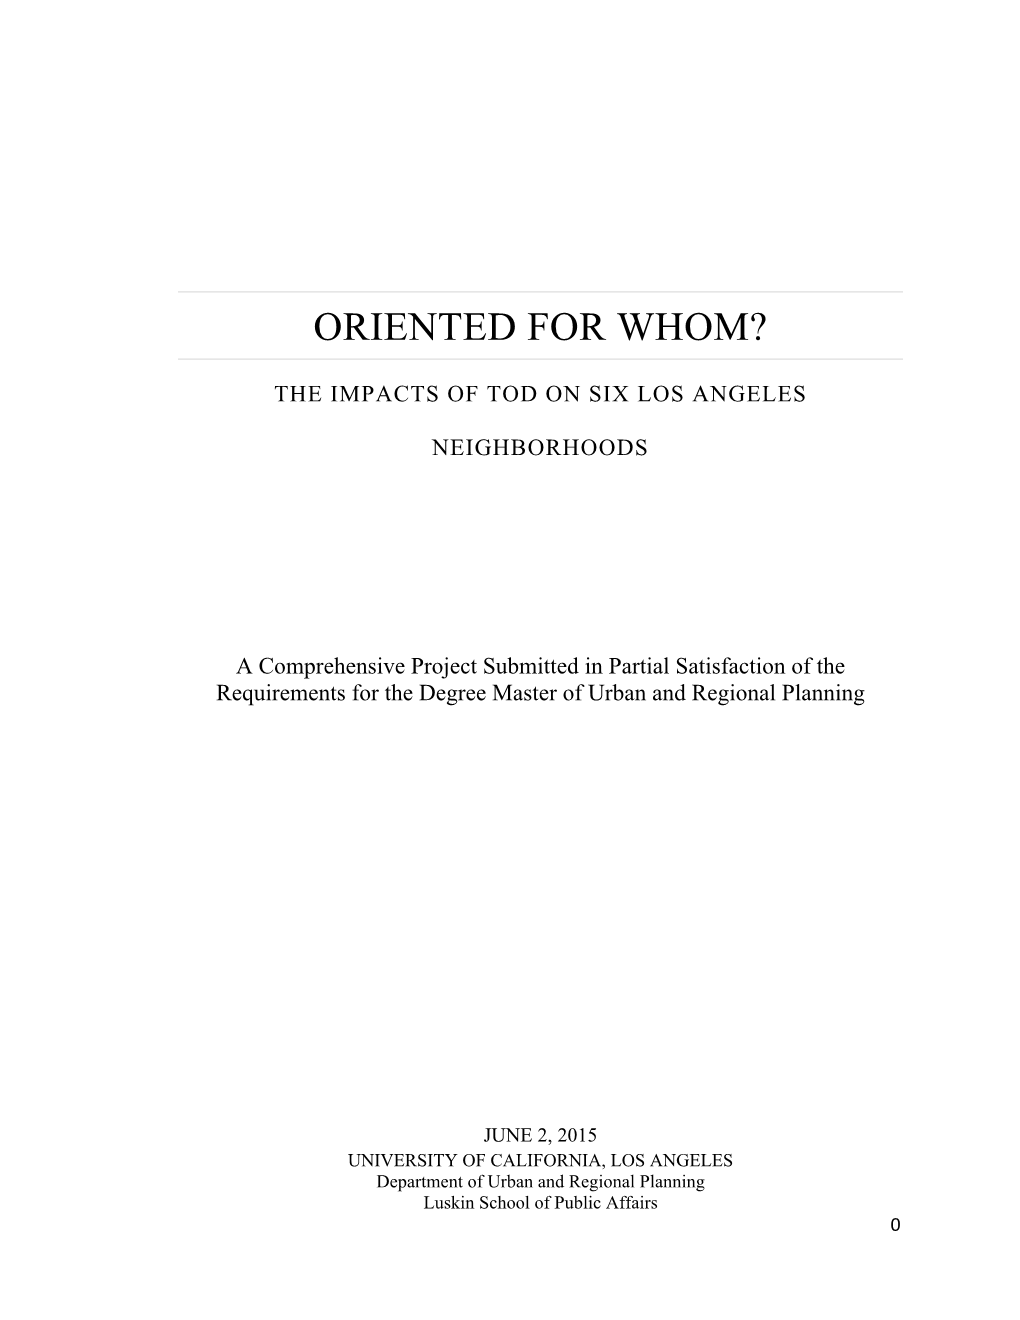 Oriented for Whom?